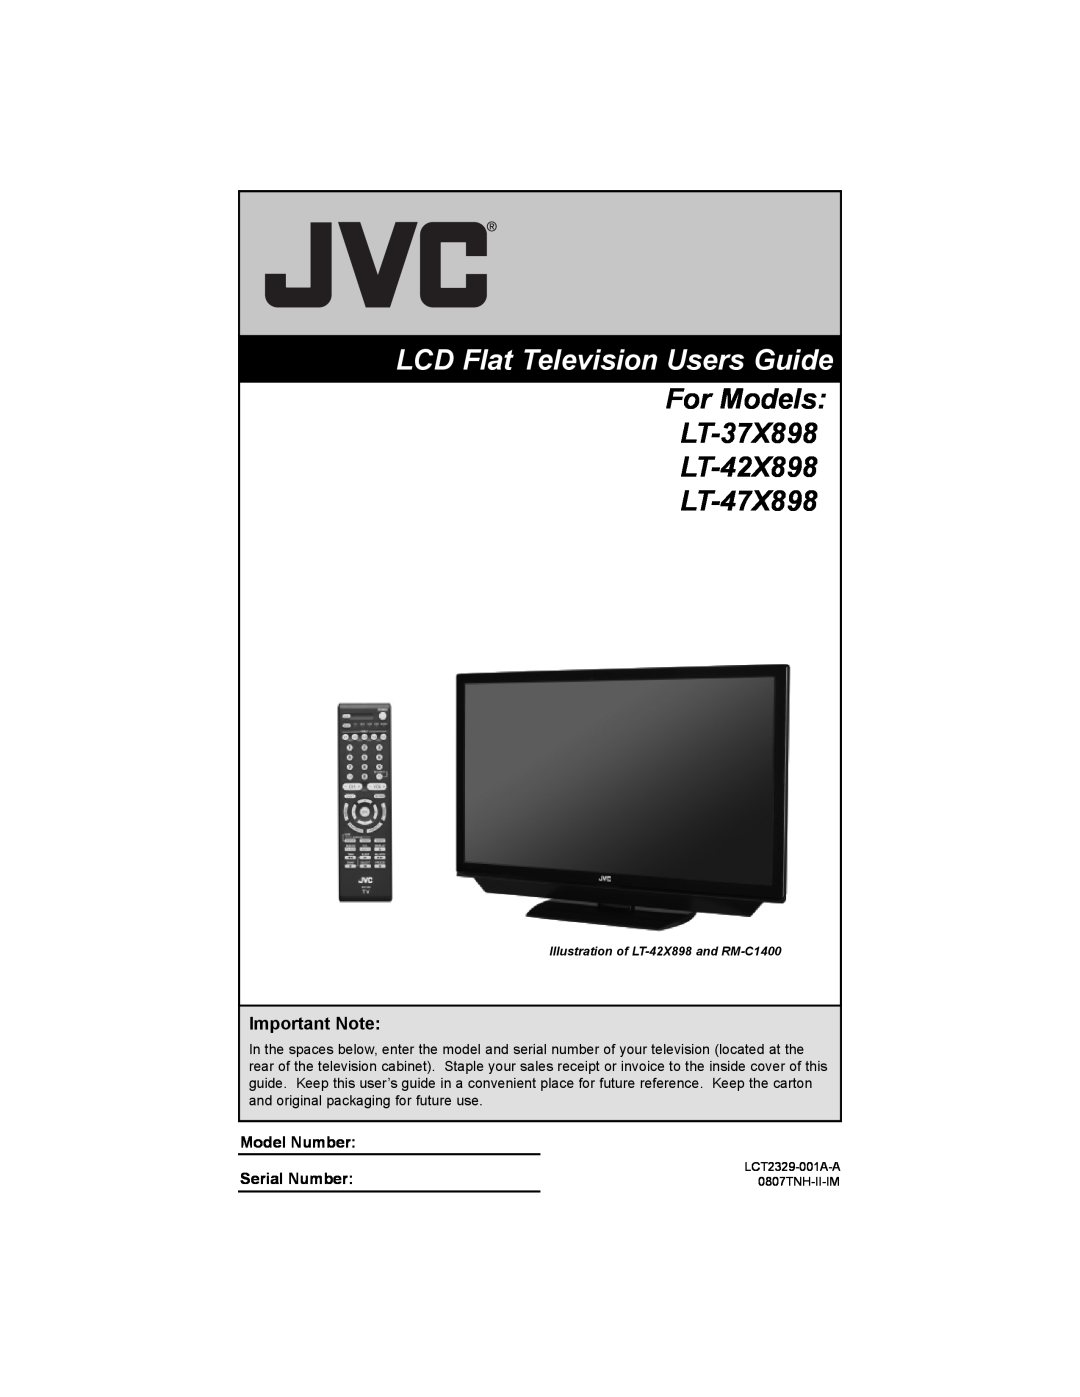 JVC LT-37X898, LT-42X898 manual Important Note, Model Number Serial Number, LCD Flat Television Users Guide 